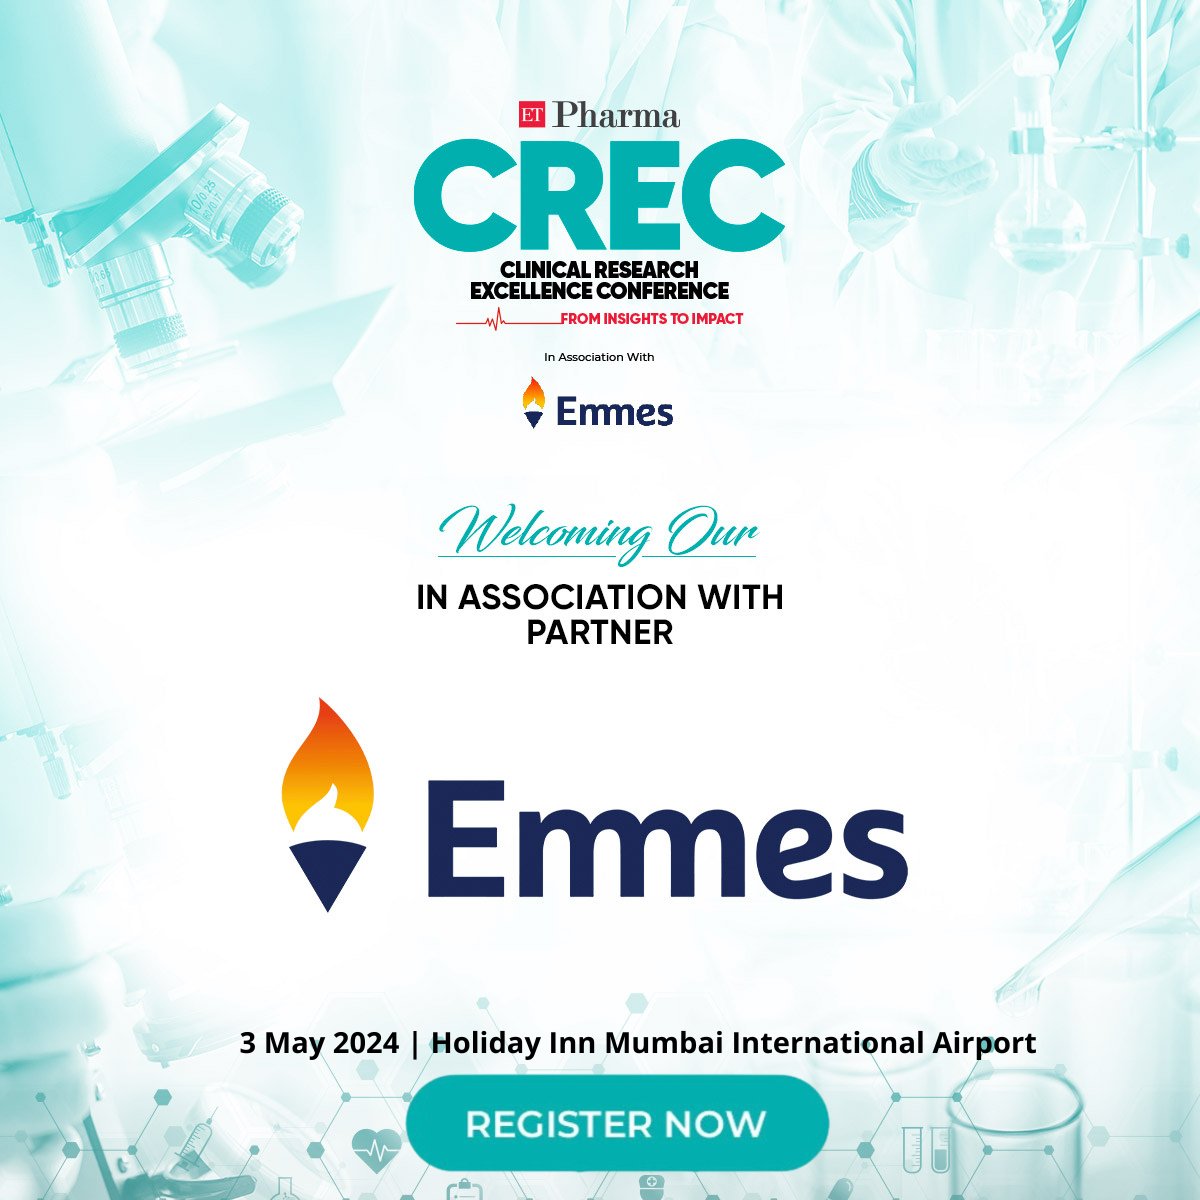 We are elated to have Emmes as our In Association with partner at #ETCREC 2024. 

Register Now: bit.ly/48cQUGd  

#ETCREC #ResearchExcellence #HealthcareInnovation #MedicalConference #ClinicalTrials #HealthScience #ScienceCommunity #ResearchCommunity